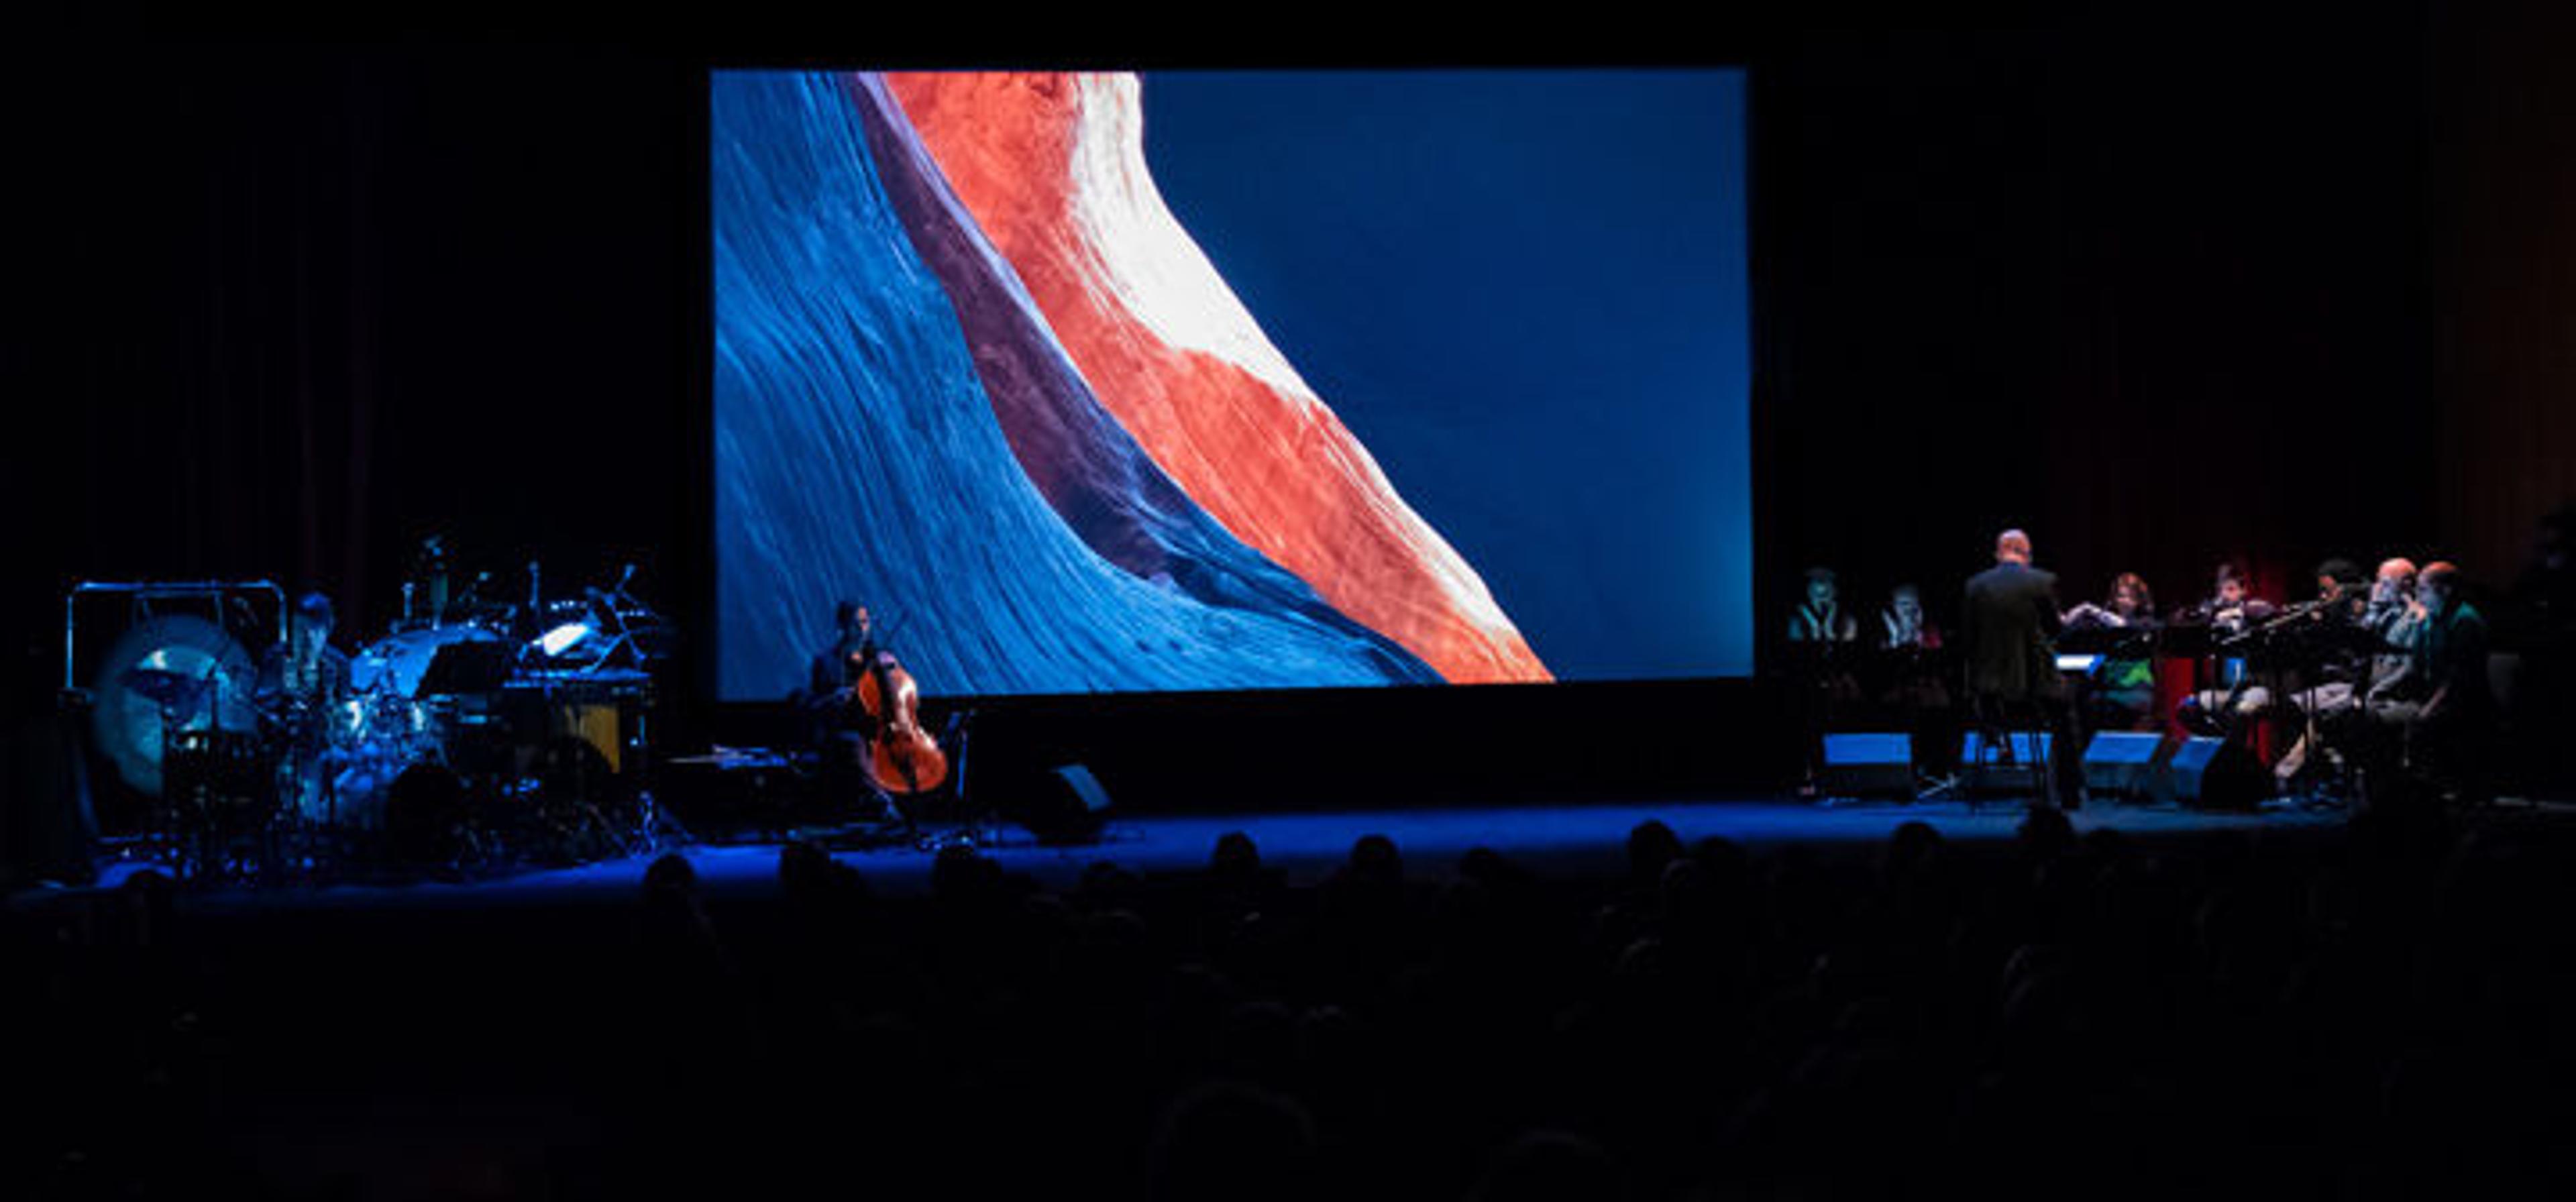 On a darkened stage several musicians and a chamber choir perform before a screen projection of a film depicting the Colorado River basin